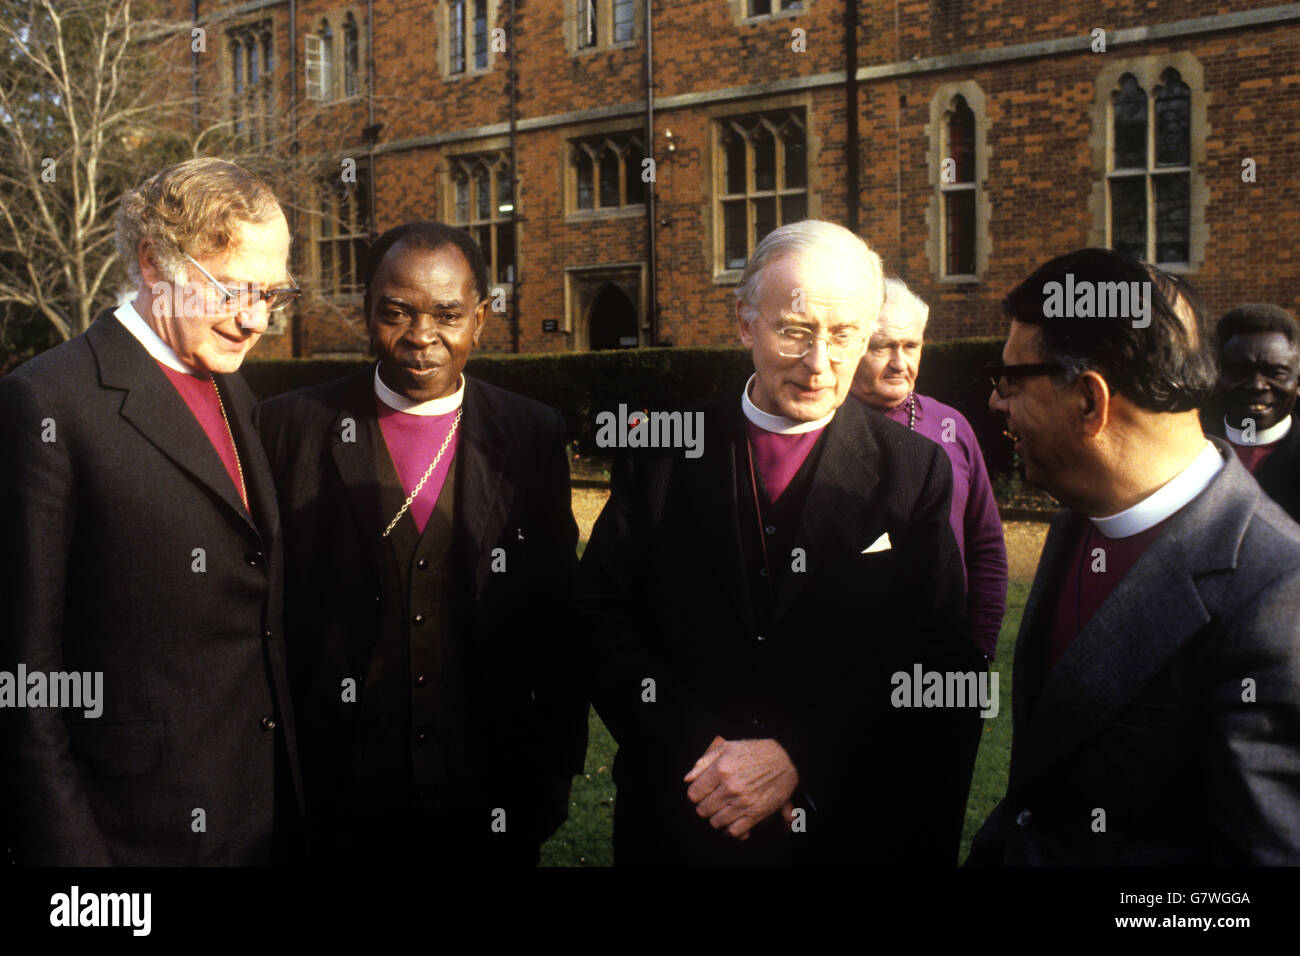 Leaders of the world wide Anglican Church meet at Bishop Woodford House, Ely. (l-r) Bishop Robert Runcie, Archbishop of Canterbury-elect, Archbishop Timothy Olufosoye (Nigeria), Dr. Donald Coggan, Archbishop of Canterbury who retires in January, and Bishop Hassan Dehqani-Tafti (President Bishop, Jerusalem and the Middle East), whose wife saved him from assassination a month ago. Stock Photo